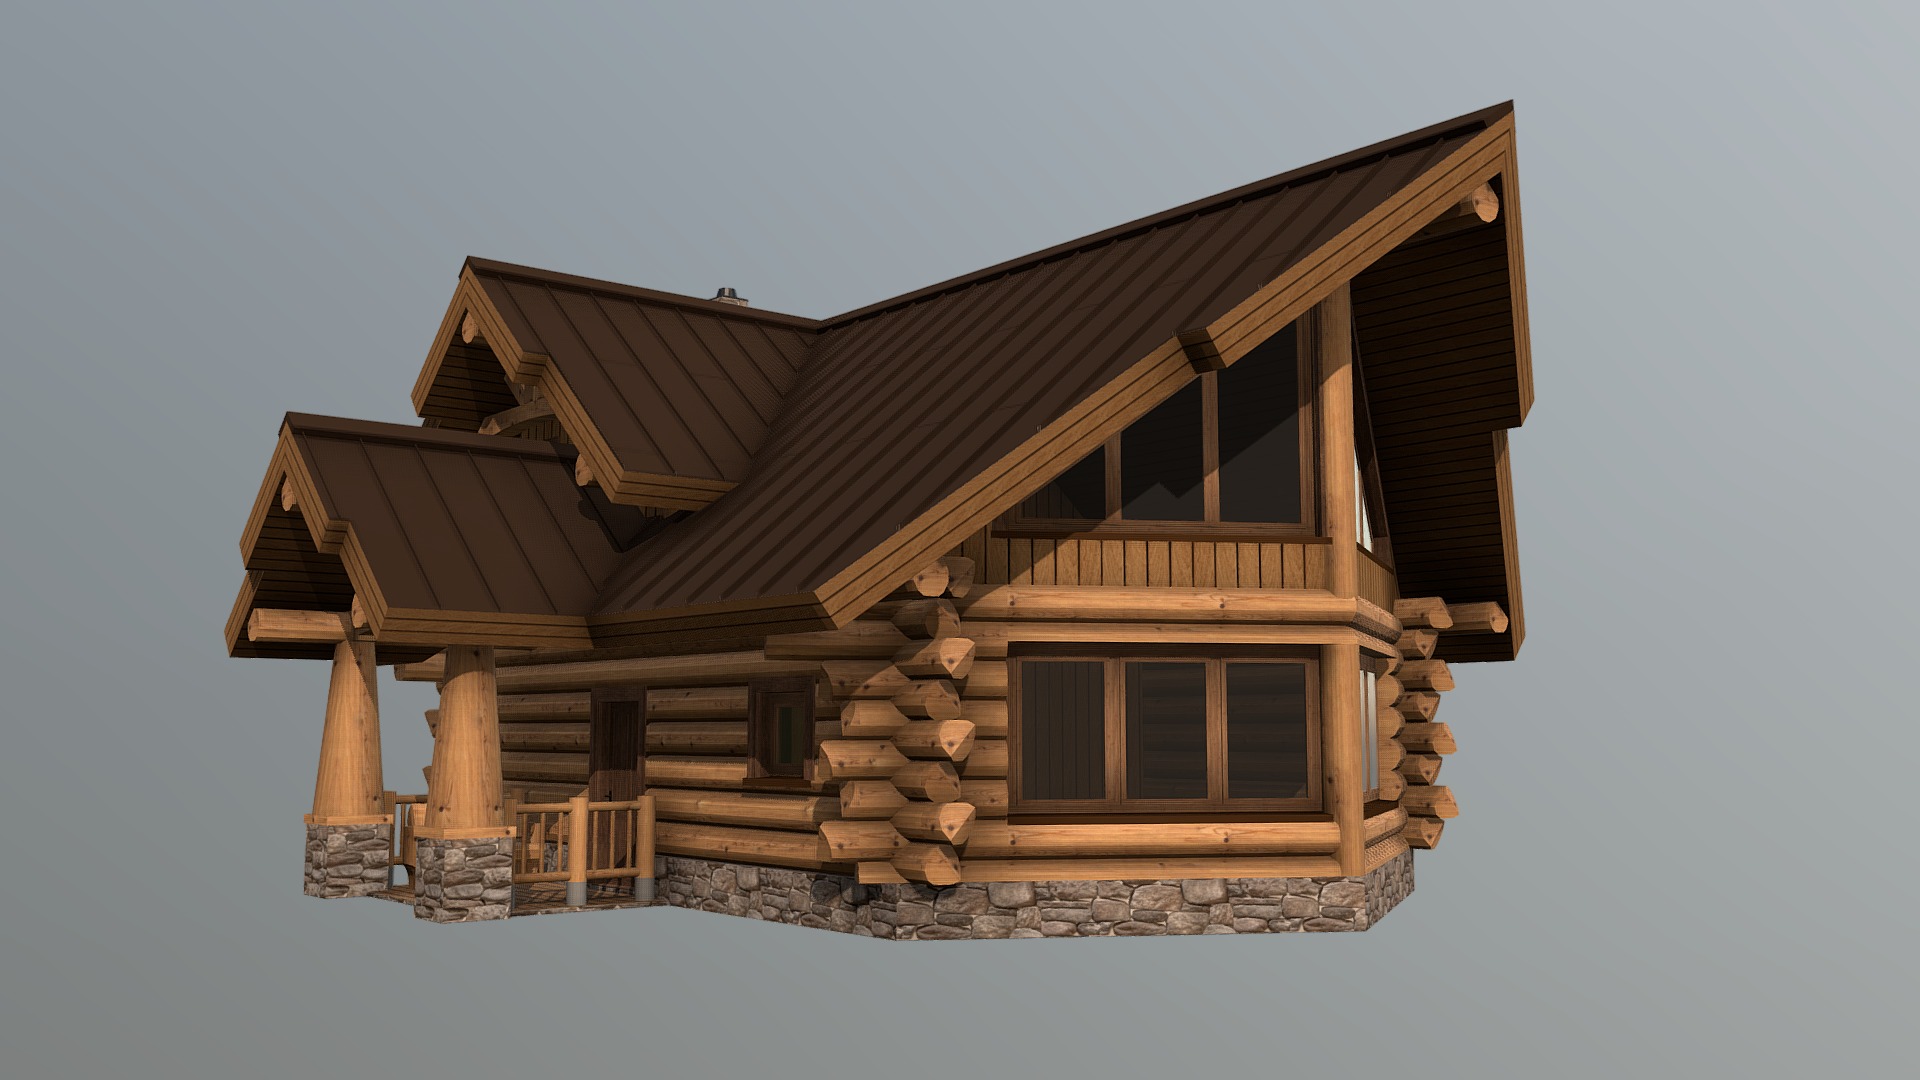 3D model Баня 2.0 - This is a 3D model of the Баня 2.0. The 3D model is about a house with a wood roof.